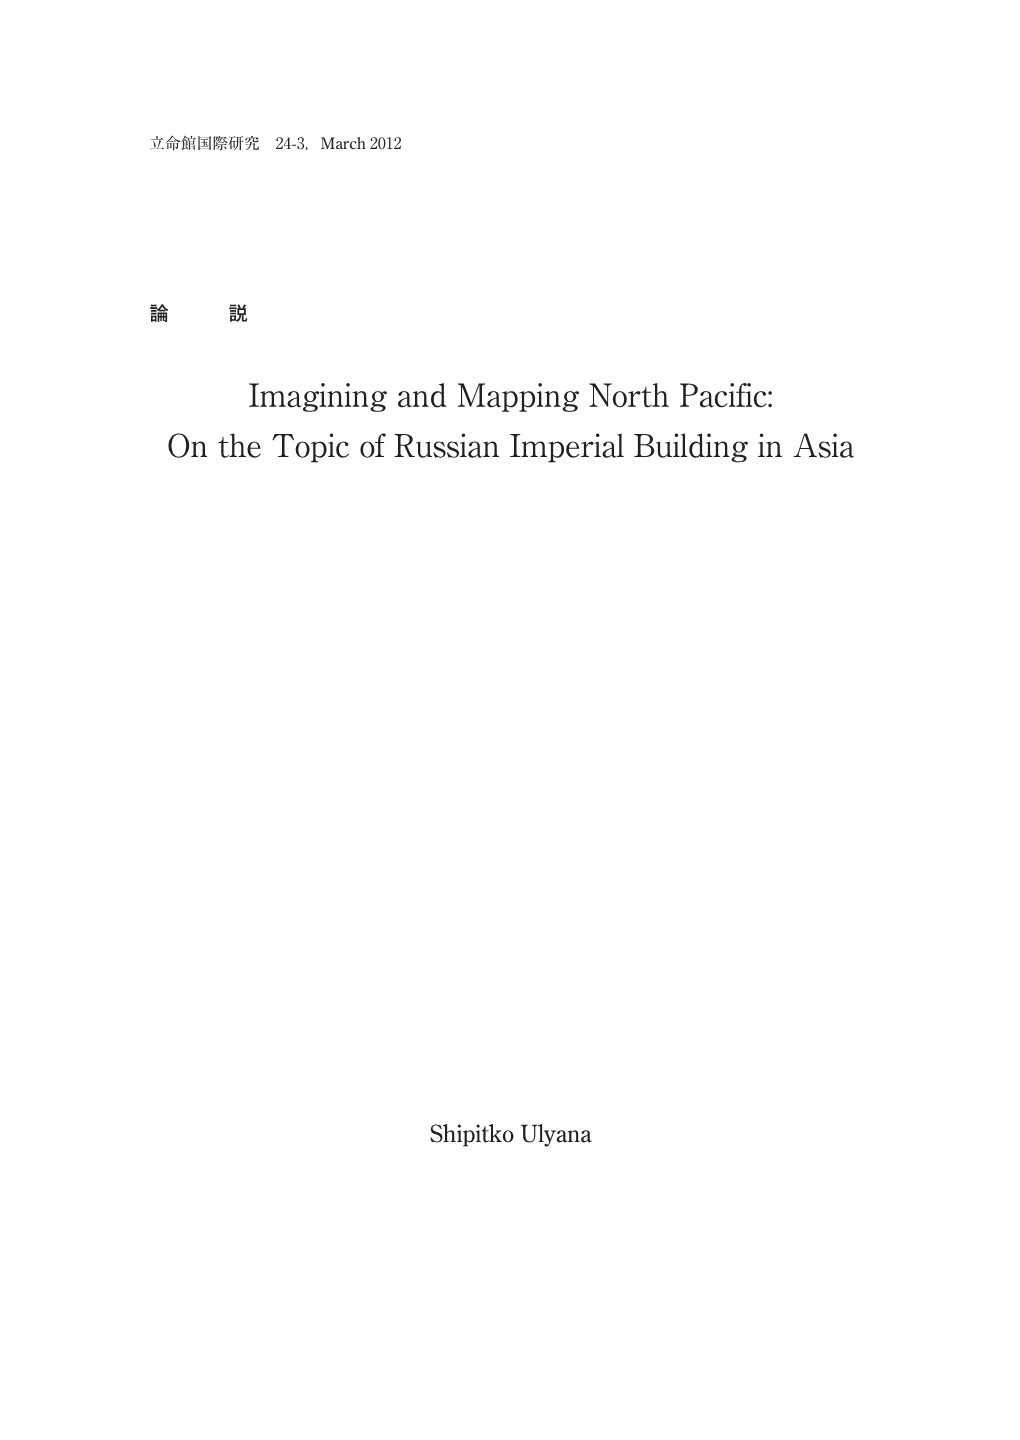 Imagining and Mapping North Pacific: on the Topic of Russian Imperial Building in Asia